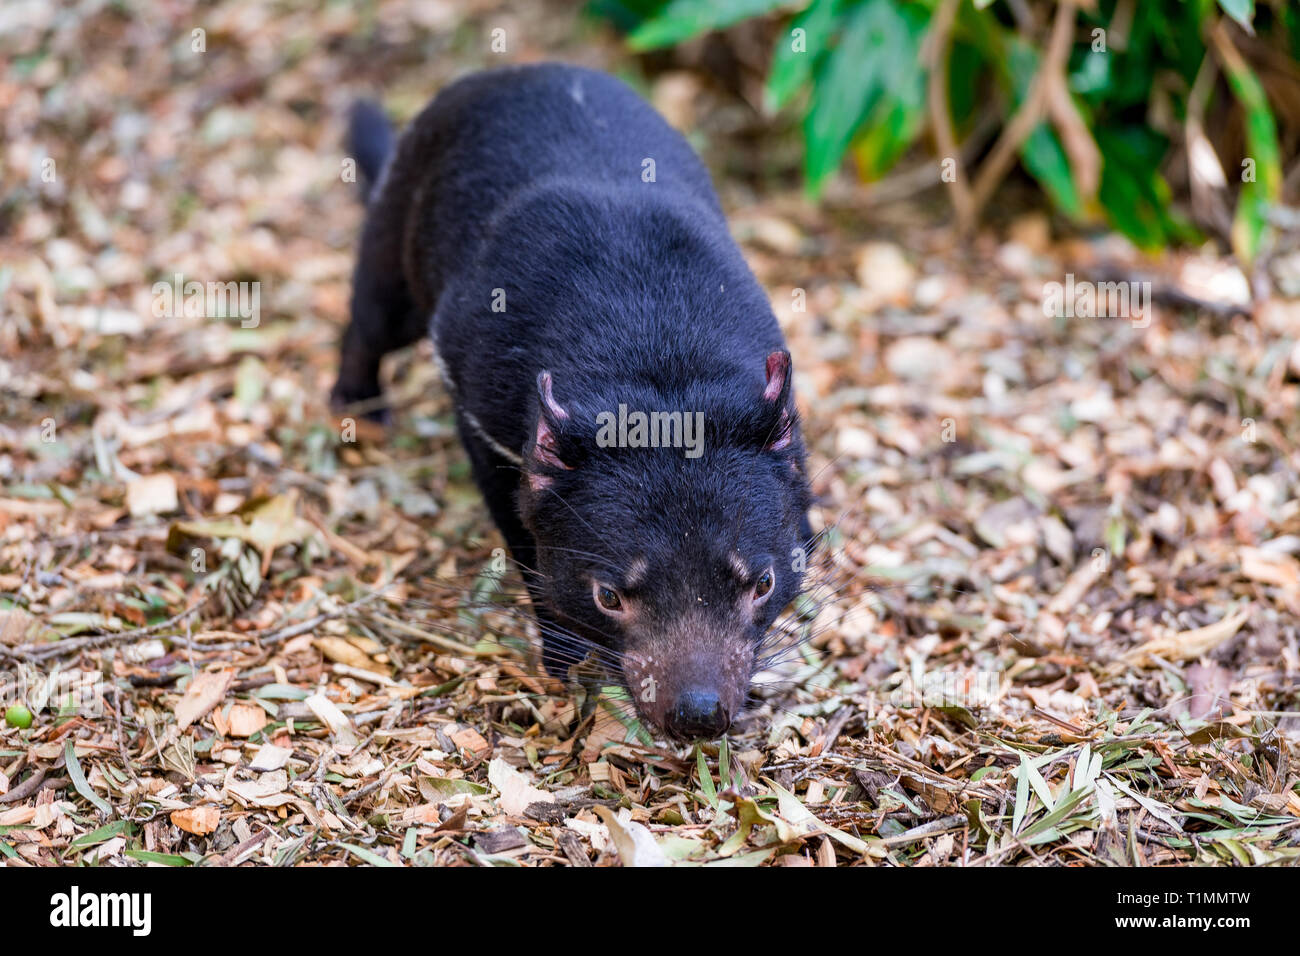 A Tasmanian Devil scurries across his environment. This furry creature is an endangered native Australian animal. Stock Photo